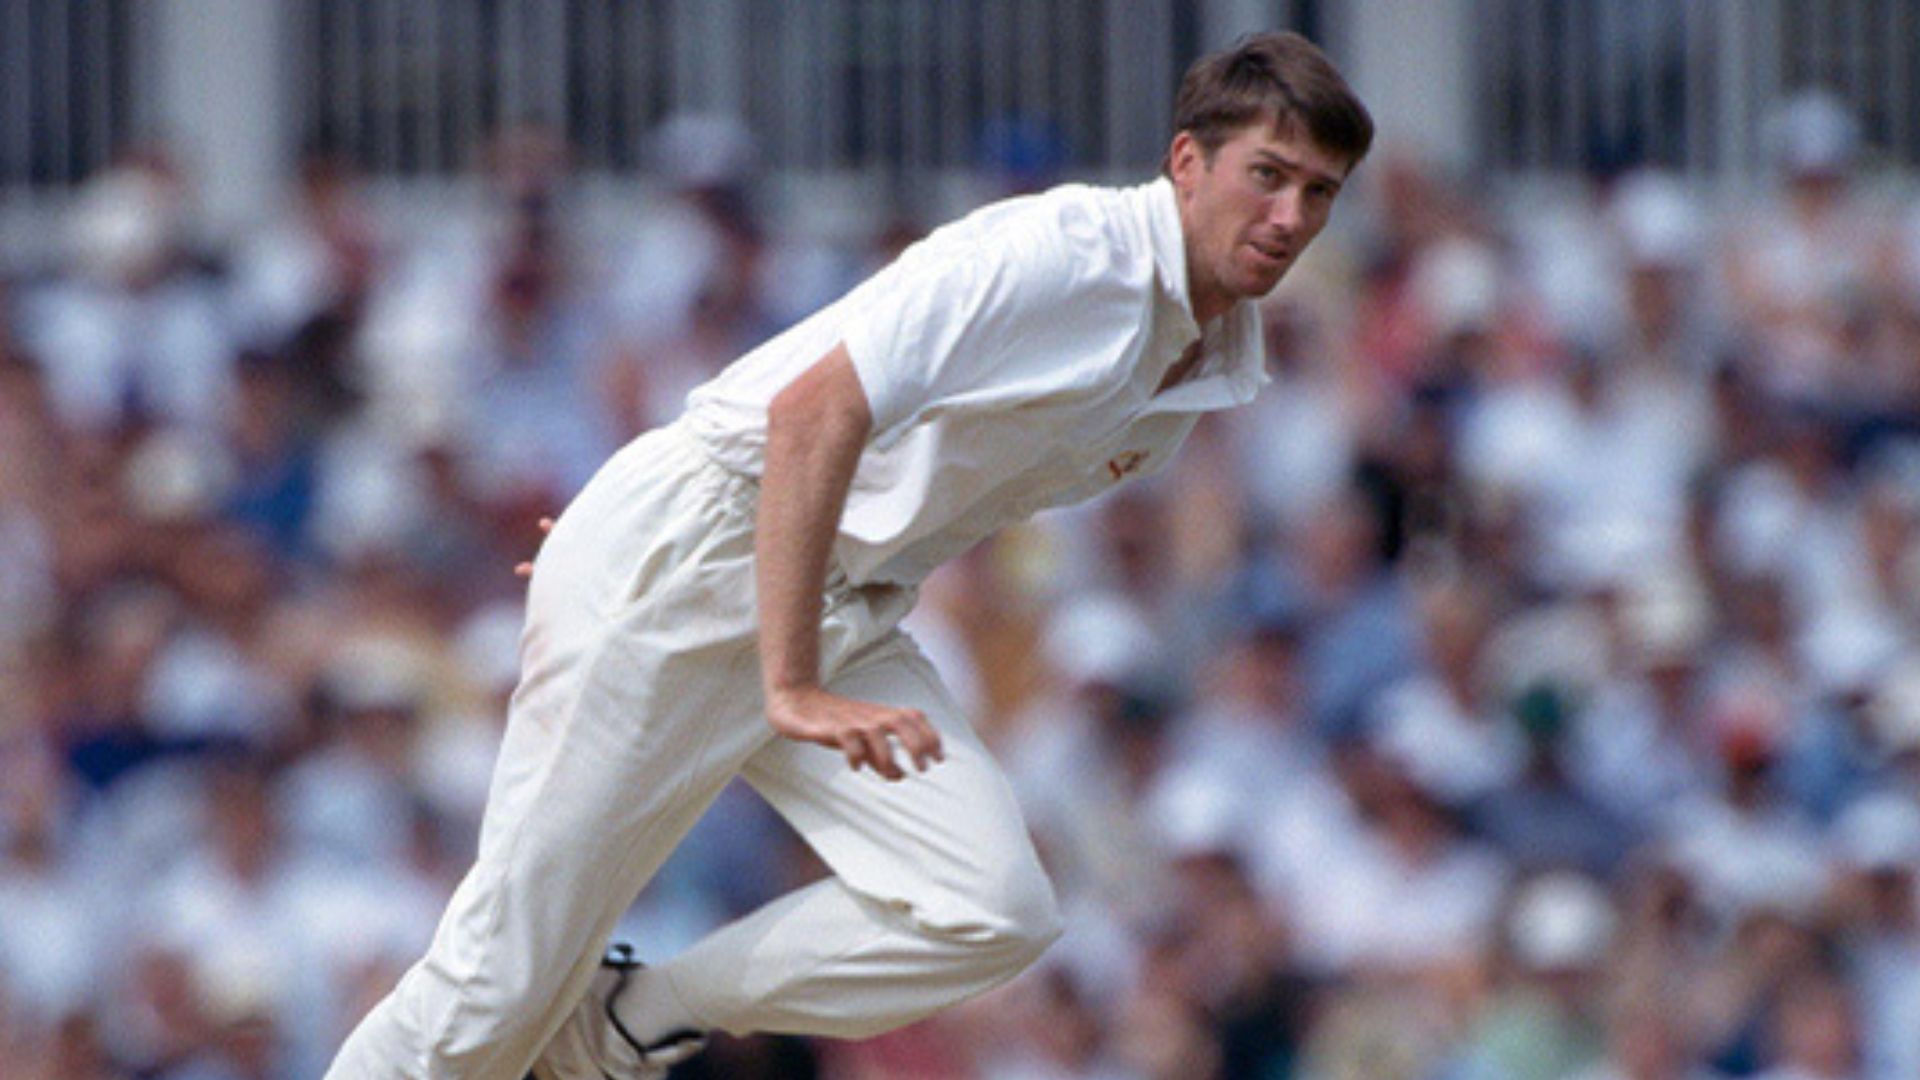 Glenn McGrath was the leading wicket-taker among the pacers before James Anderson overtook him.